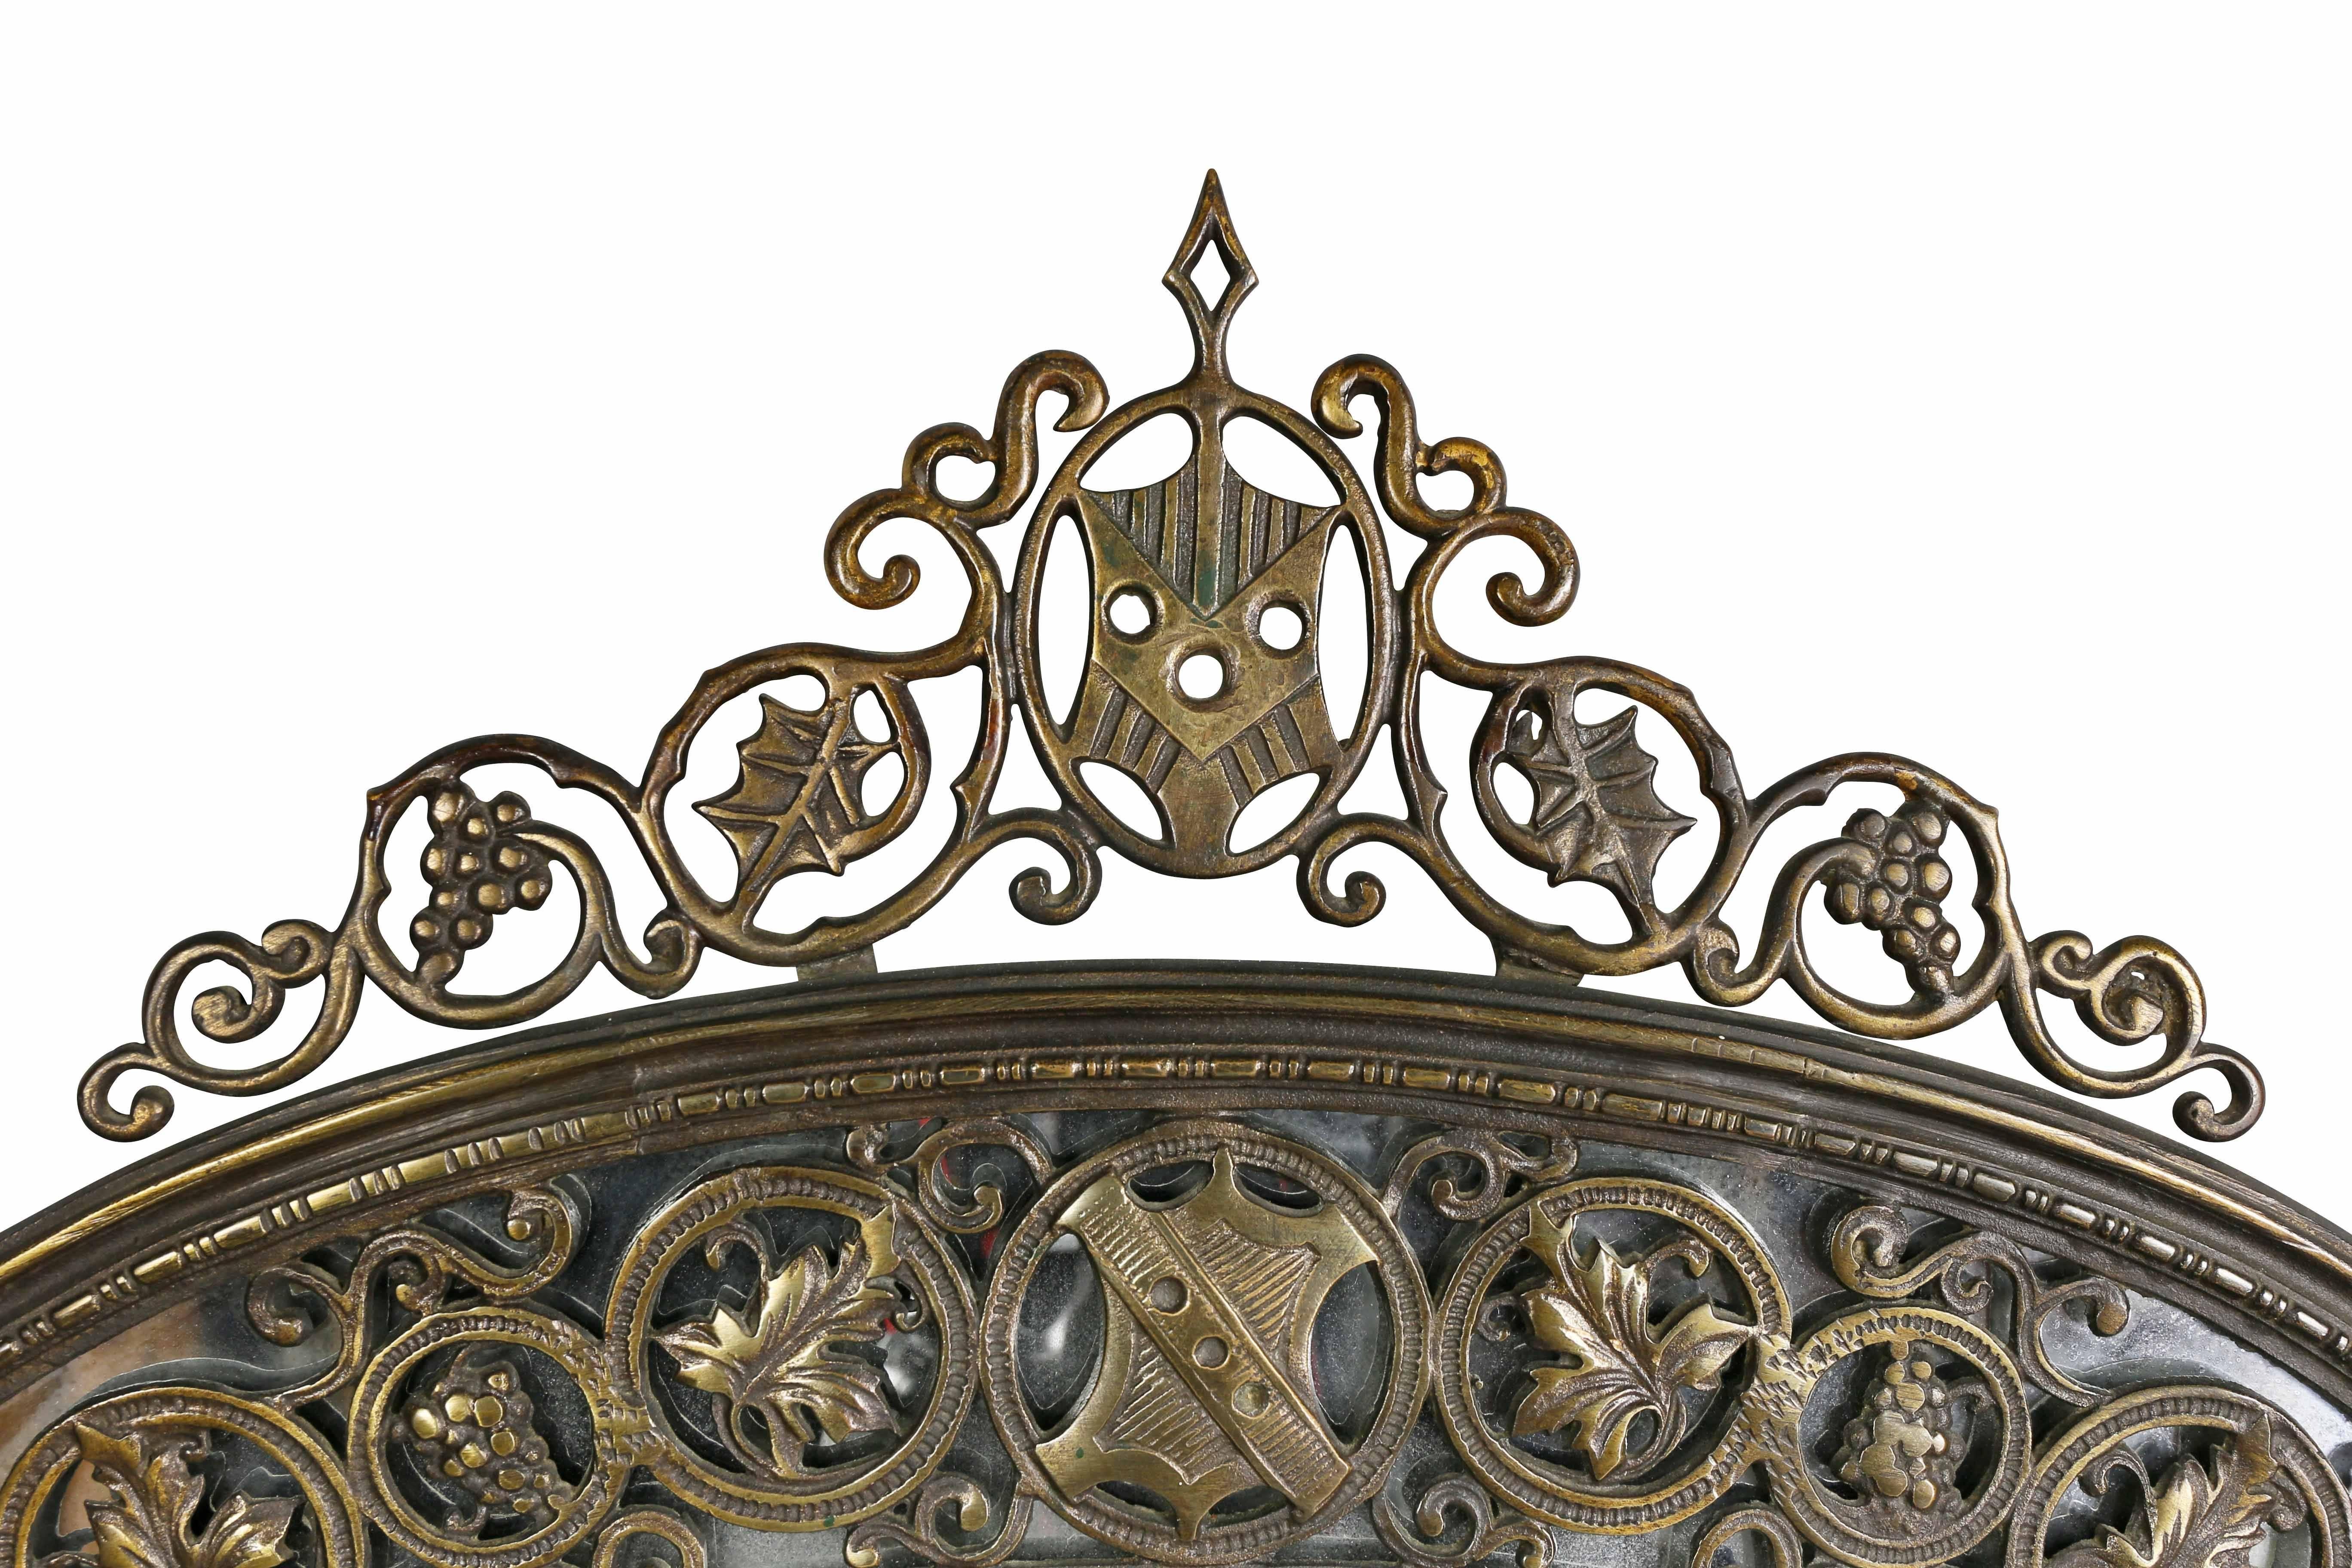 In the Renaissance style with outer mirror with scrolling decorative motifs, arched crest with central shield.